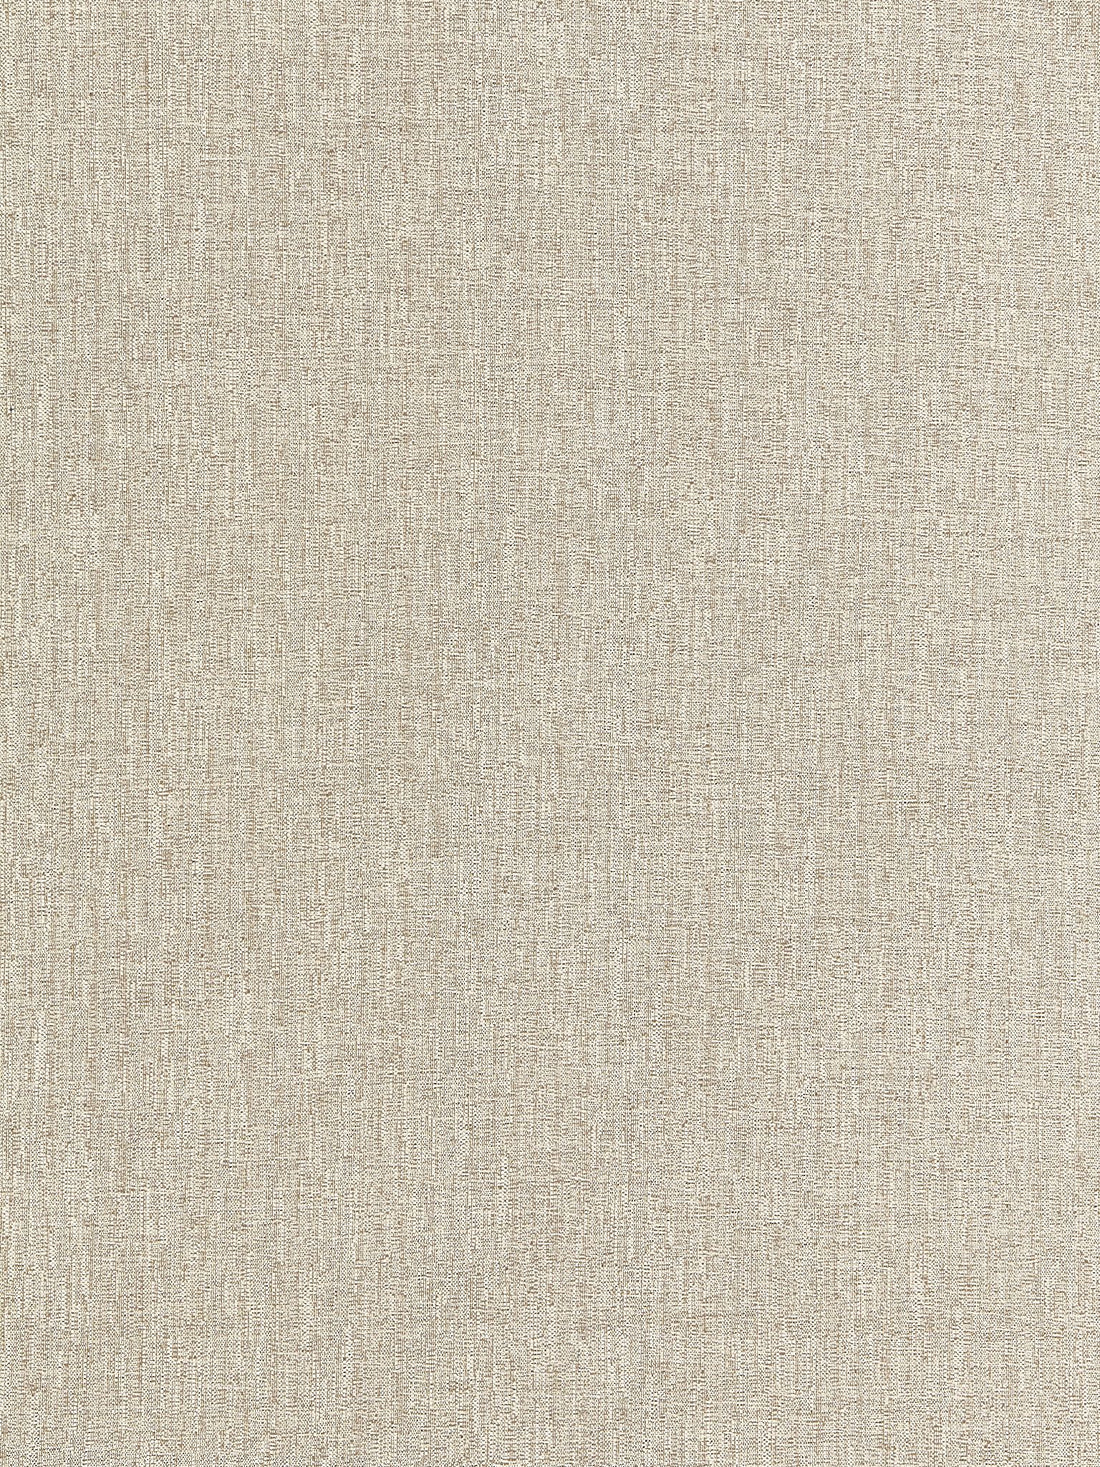 Spencer Chenille fabric in taupe color - pattern number BK 0002K65117 - by Scalamandre in the Old World Weavers collection